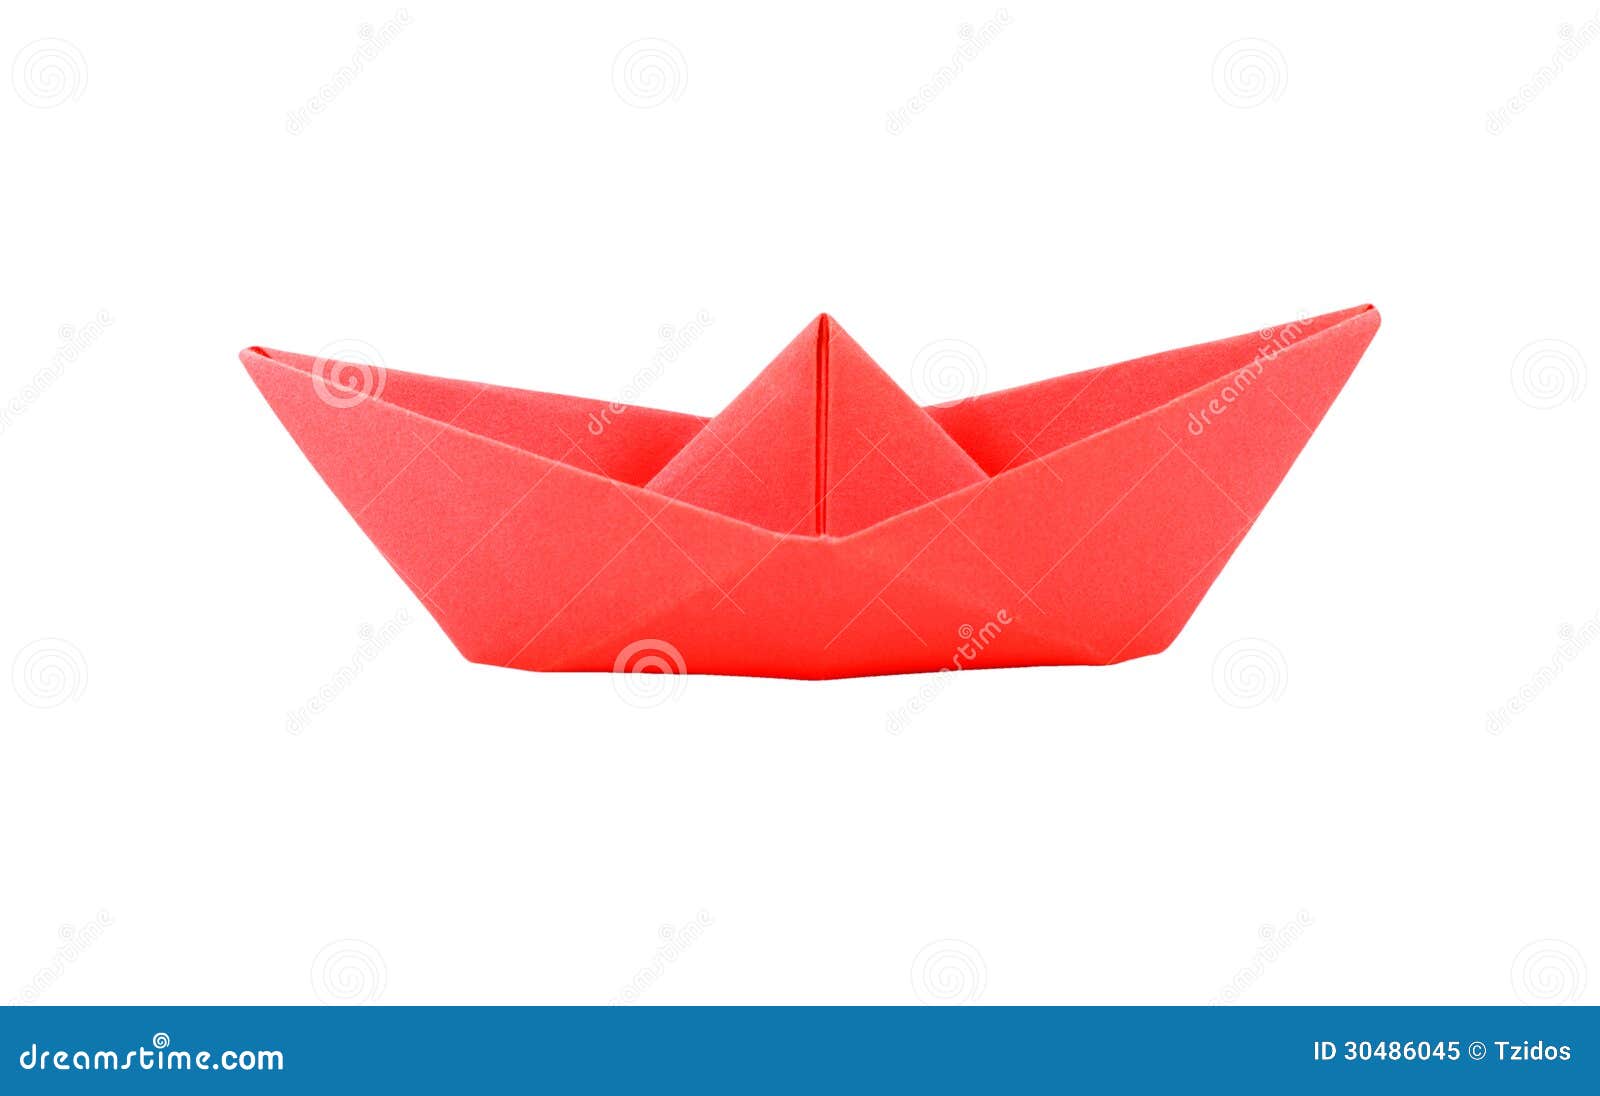 Origami Red Paper Boat Royalty Free Stock Photo - Image: 30486045